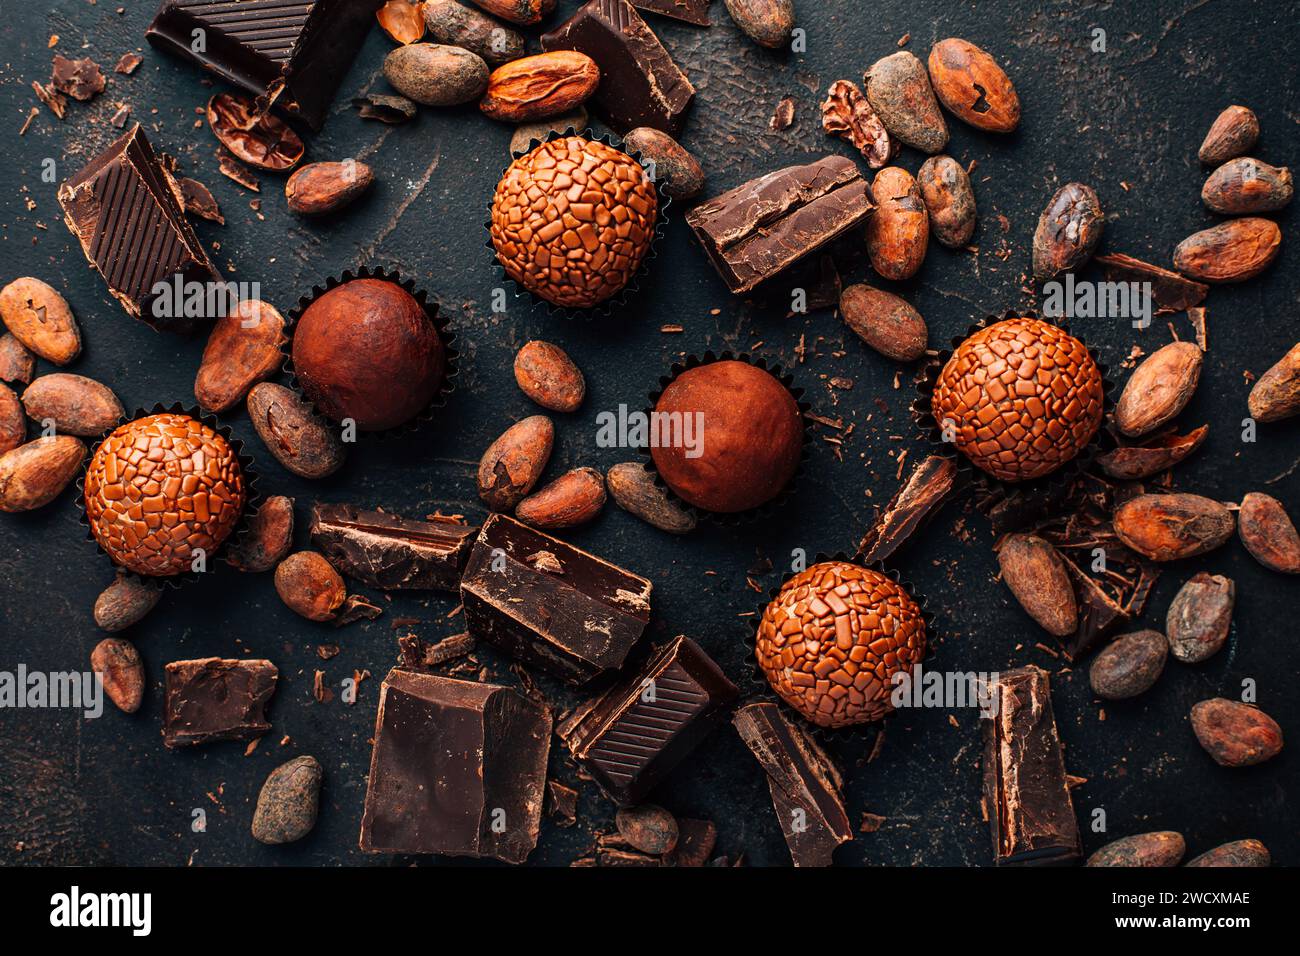 Homemade sweetmeats with chocolate bars and cocoa beans Stock Photo